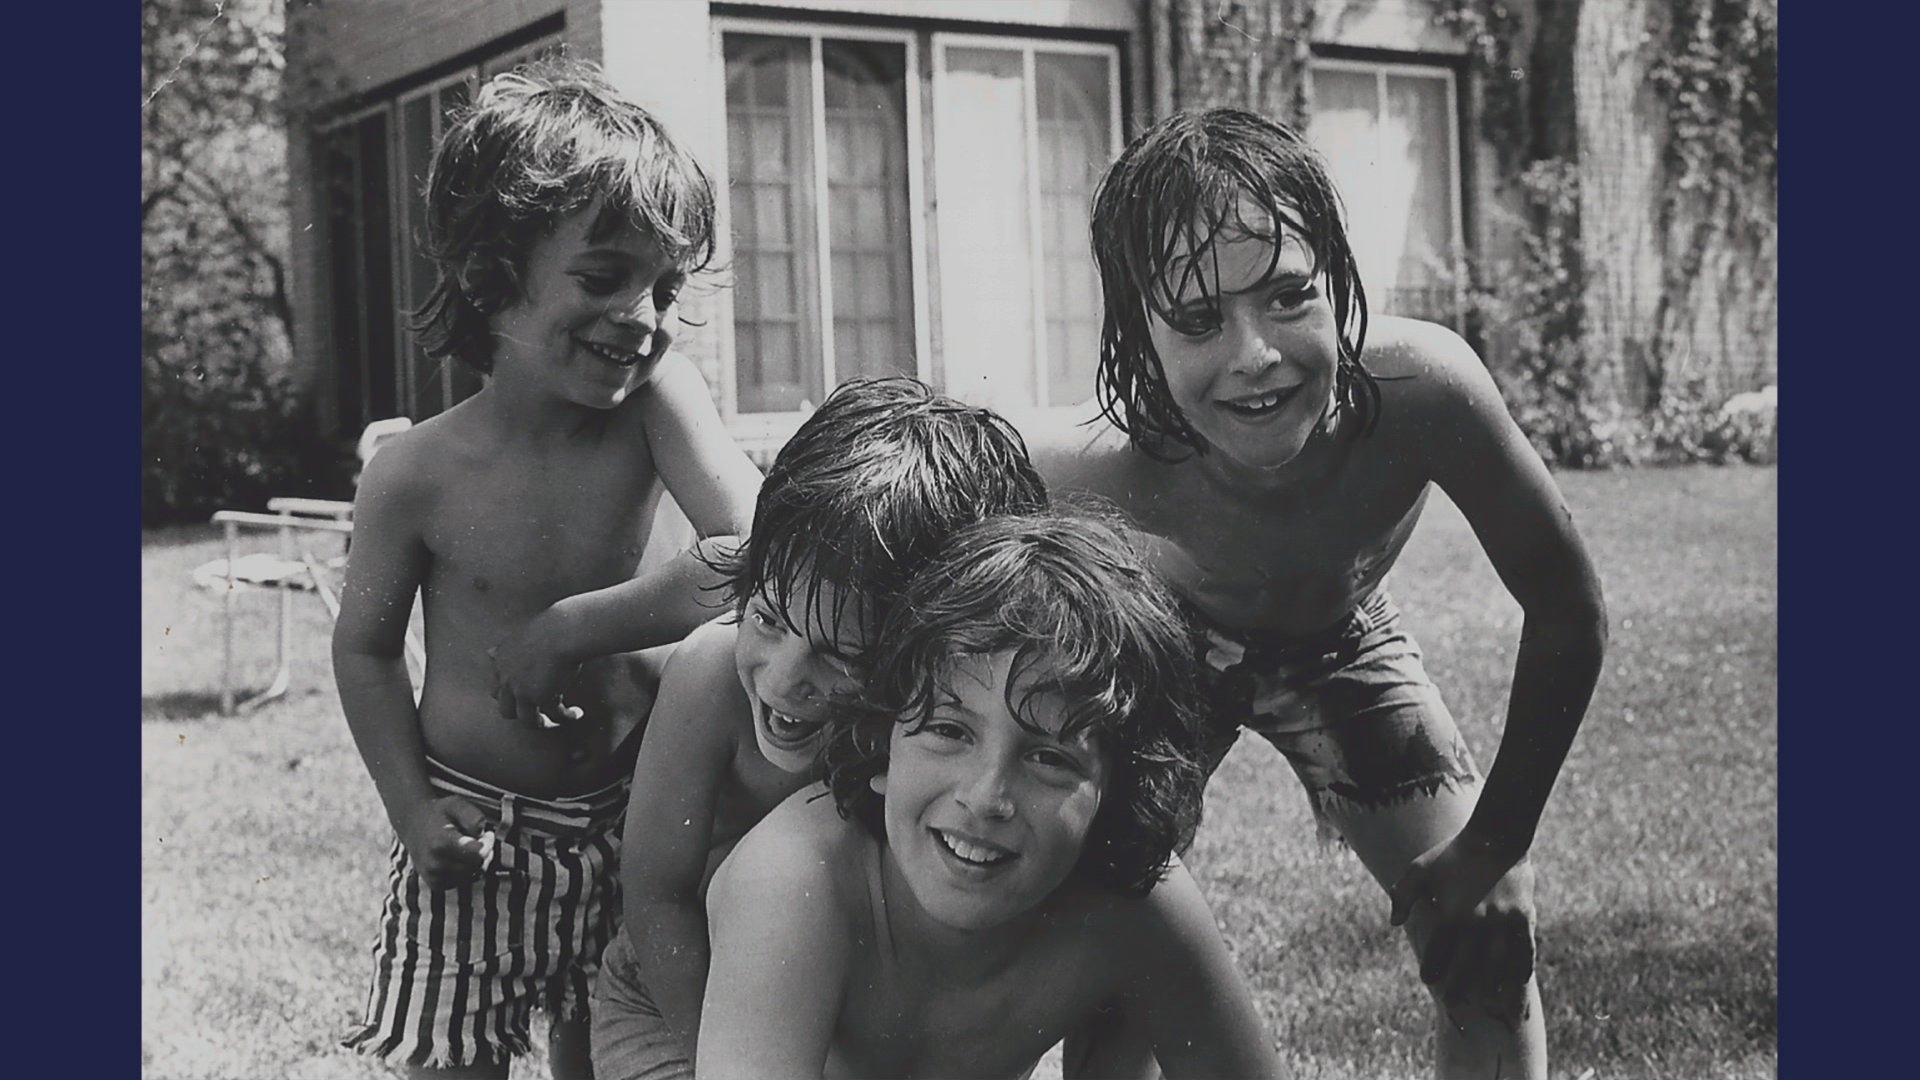 Adam and David Rudman, along with their two brothers, play in the backyard of their family home as kids.